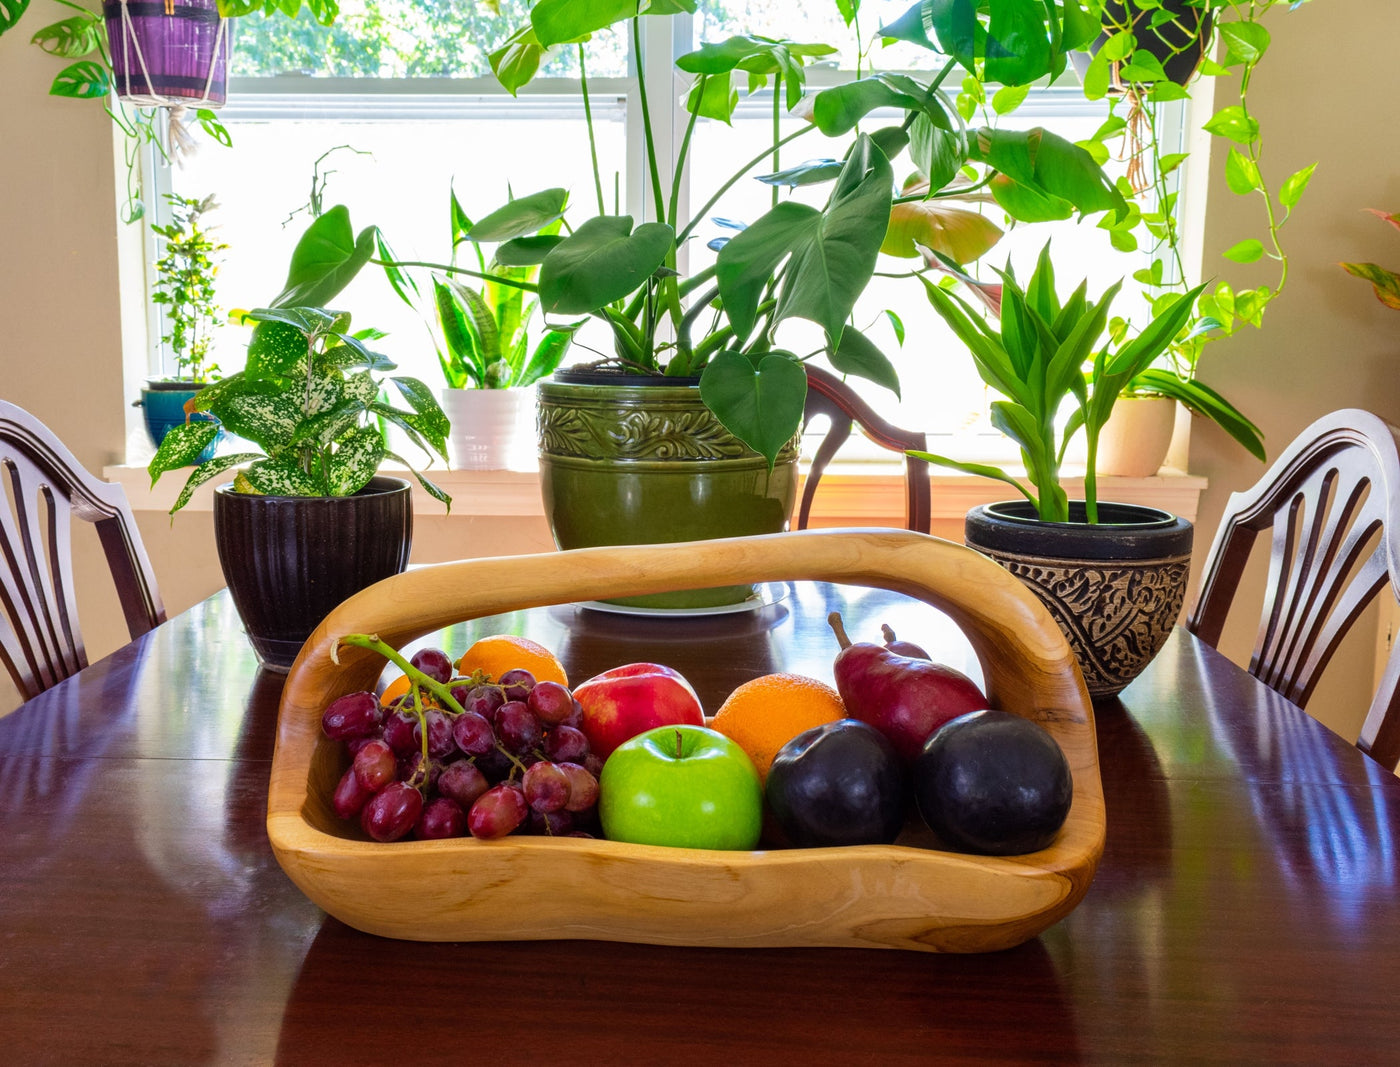 16" Wooden Handmade Fruit Decorative Bowl Centerpiece Hand Carved Decoration Handcrafted Gift Wood Rectangle Serving Bowl